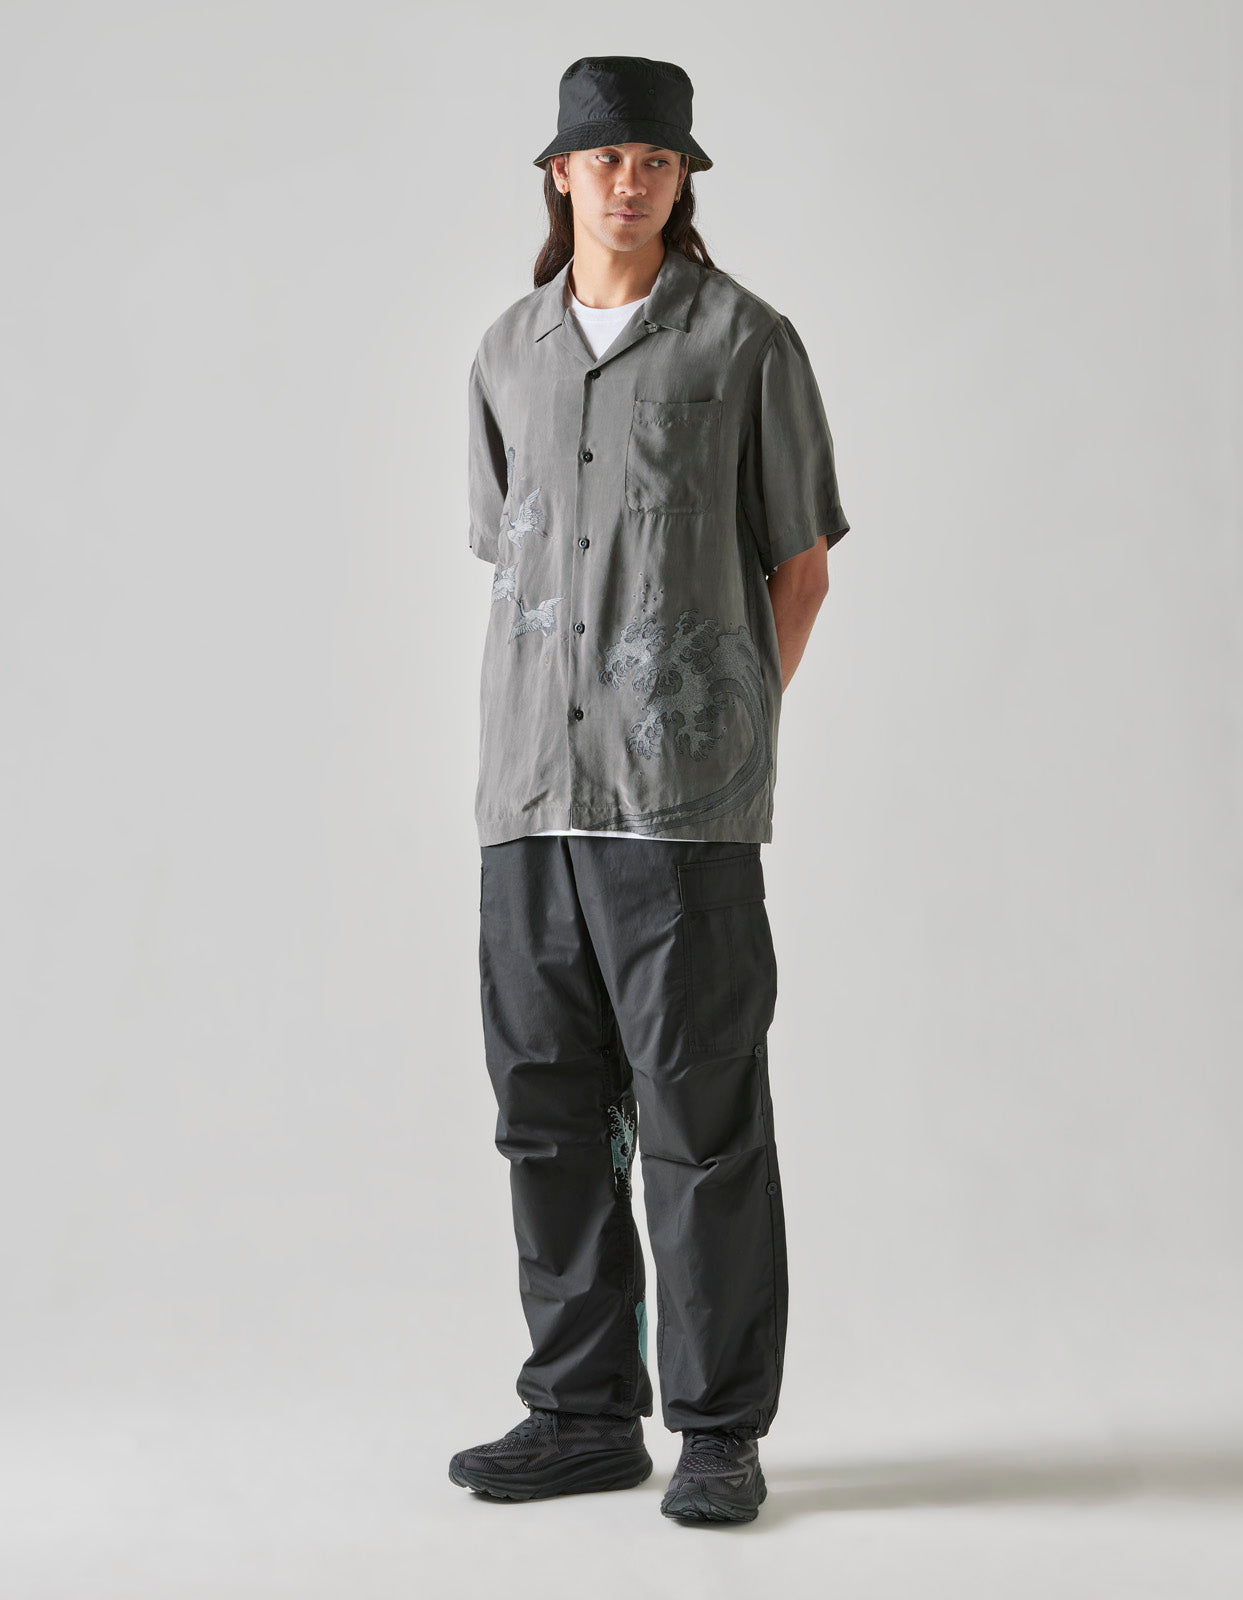 4508 Flying Cranes Embroidered Shirt Charcoal